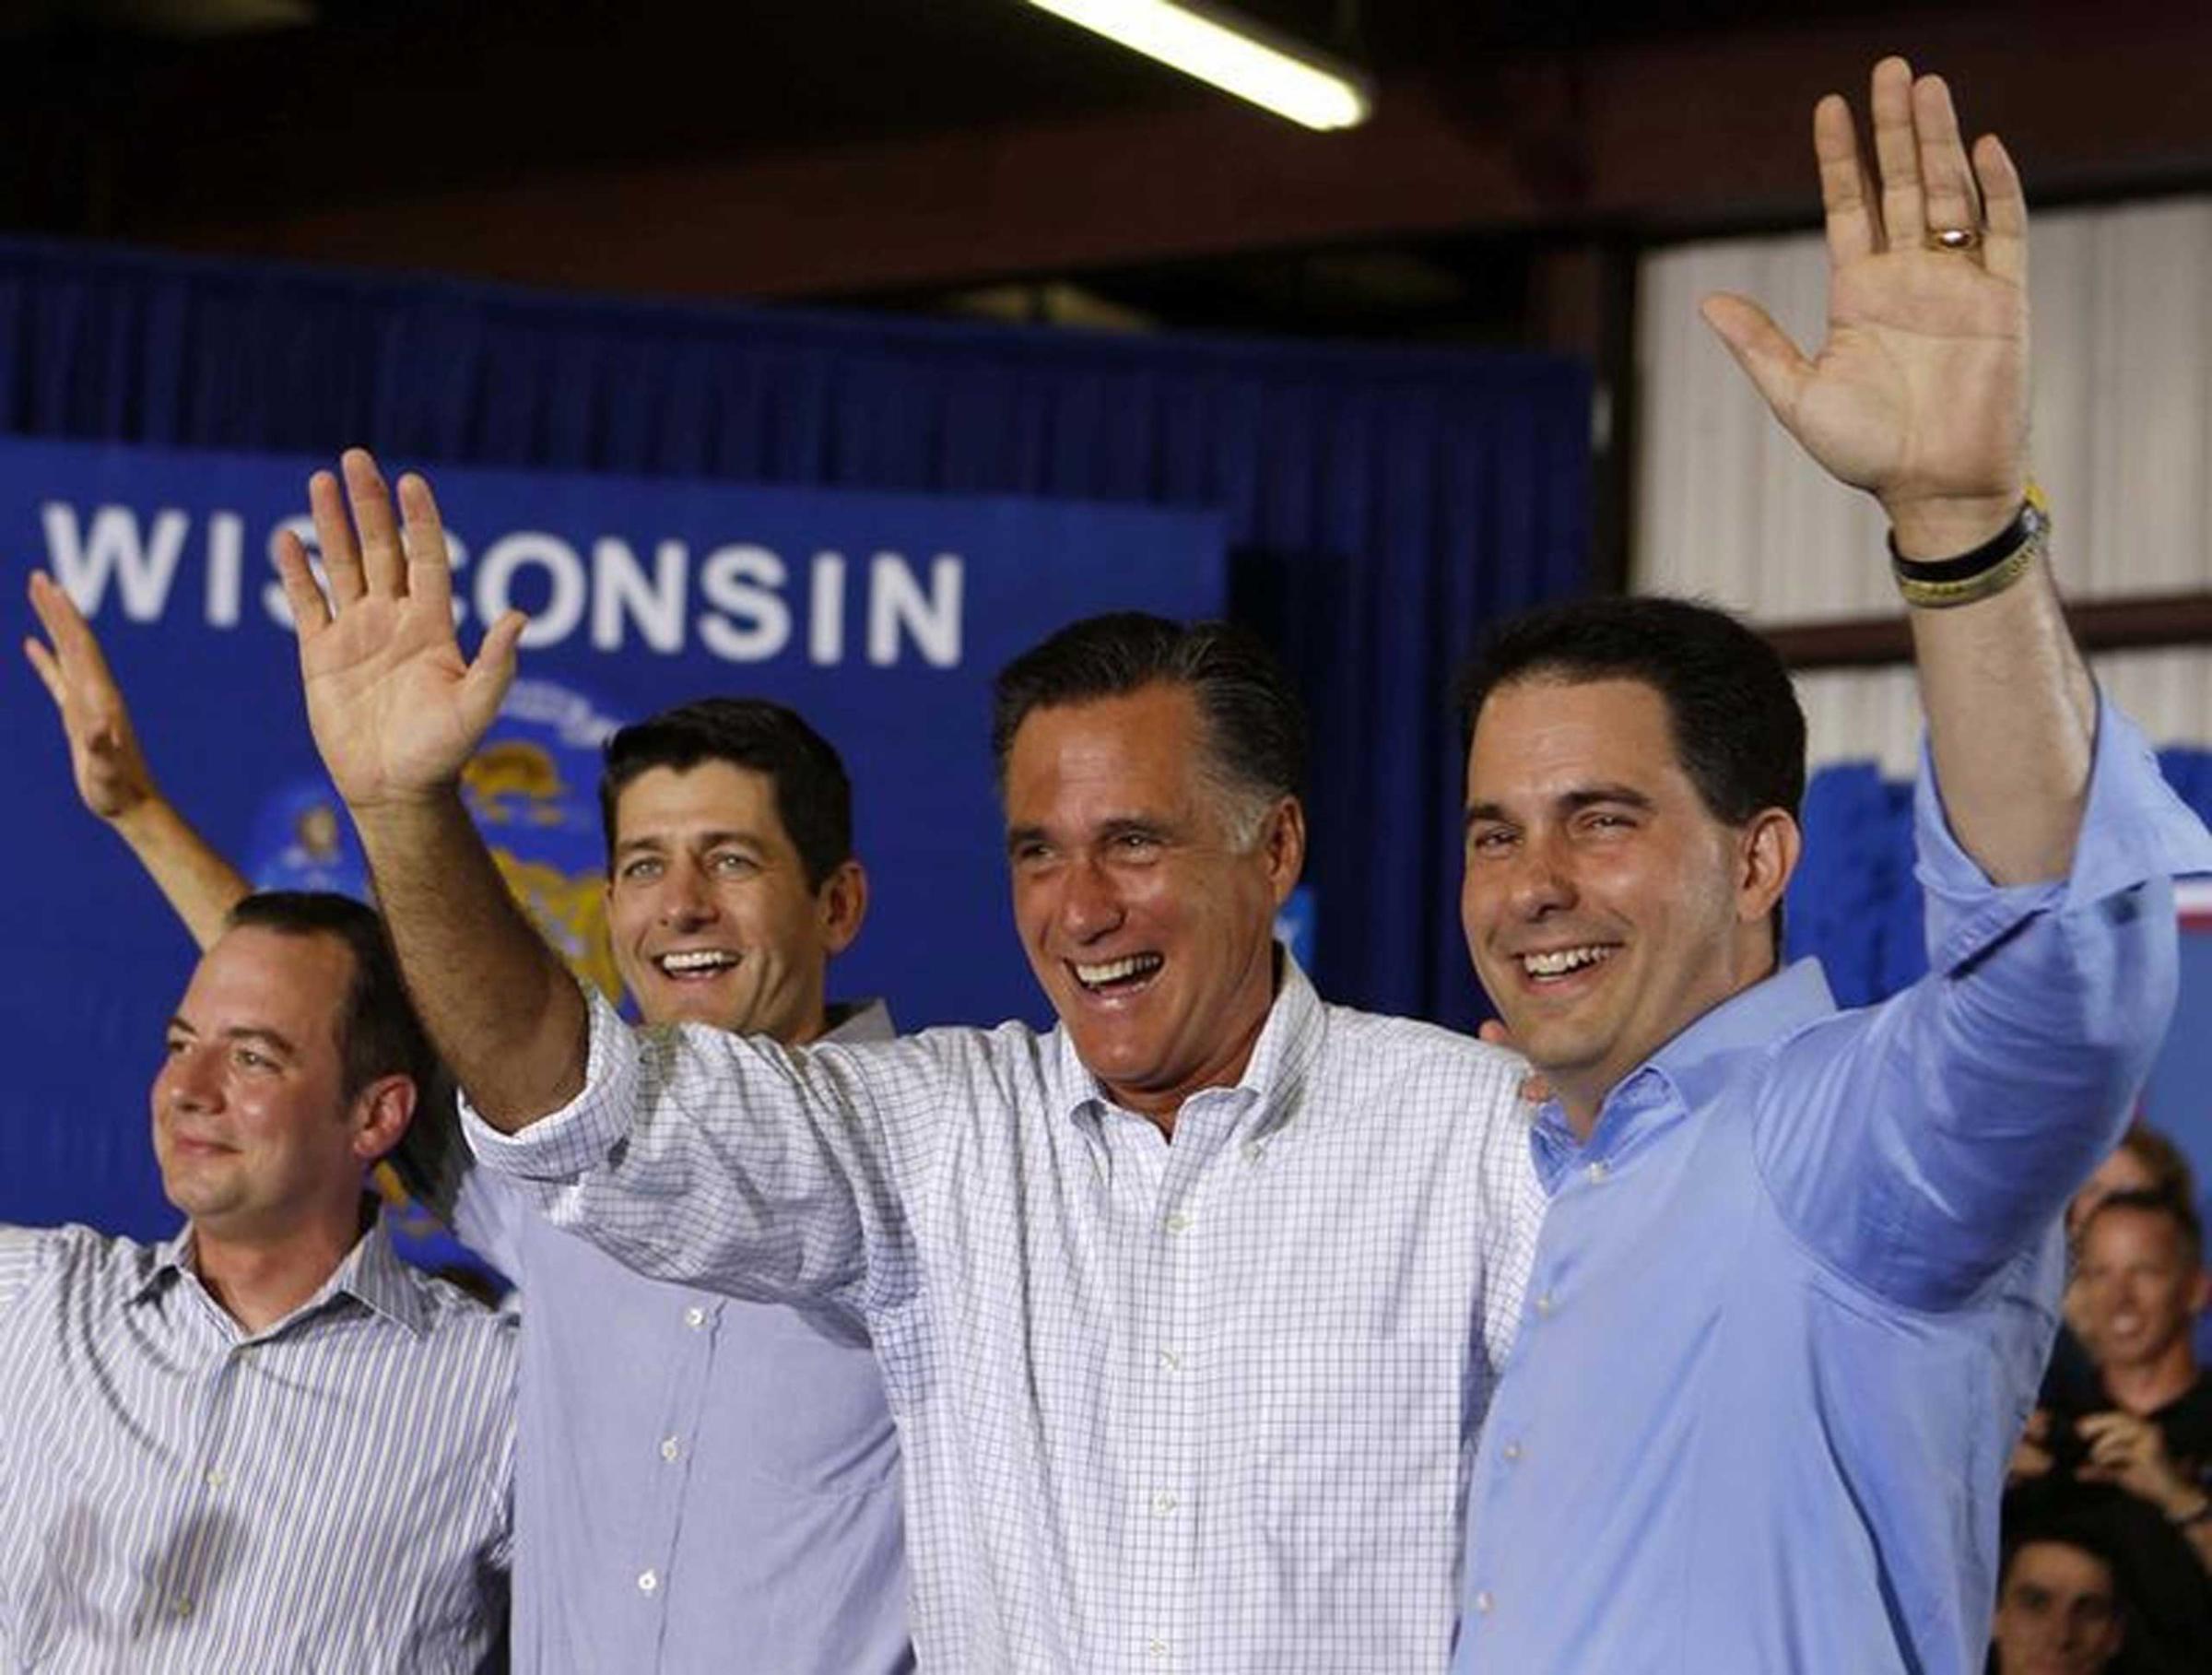 U.S. Republican Presidential candidate Mitt Romney (2nd R) waves next to Governor Scott Walker (R), Representative Paul Ryan (2nd L), and RNC Chairman Reince Priebus (L) before speaking to a crowd at Monterey Mills in Janesville, Wis., June 18, 2012.